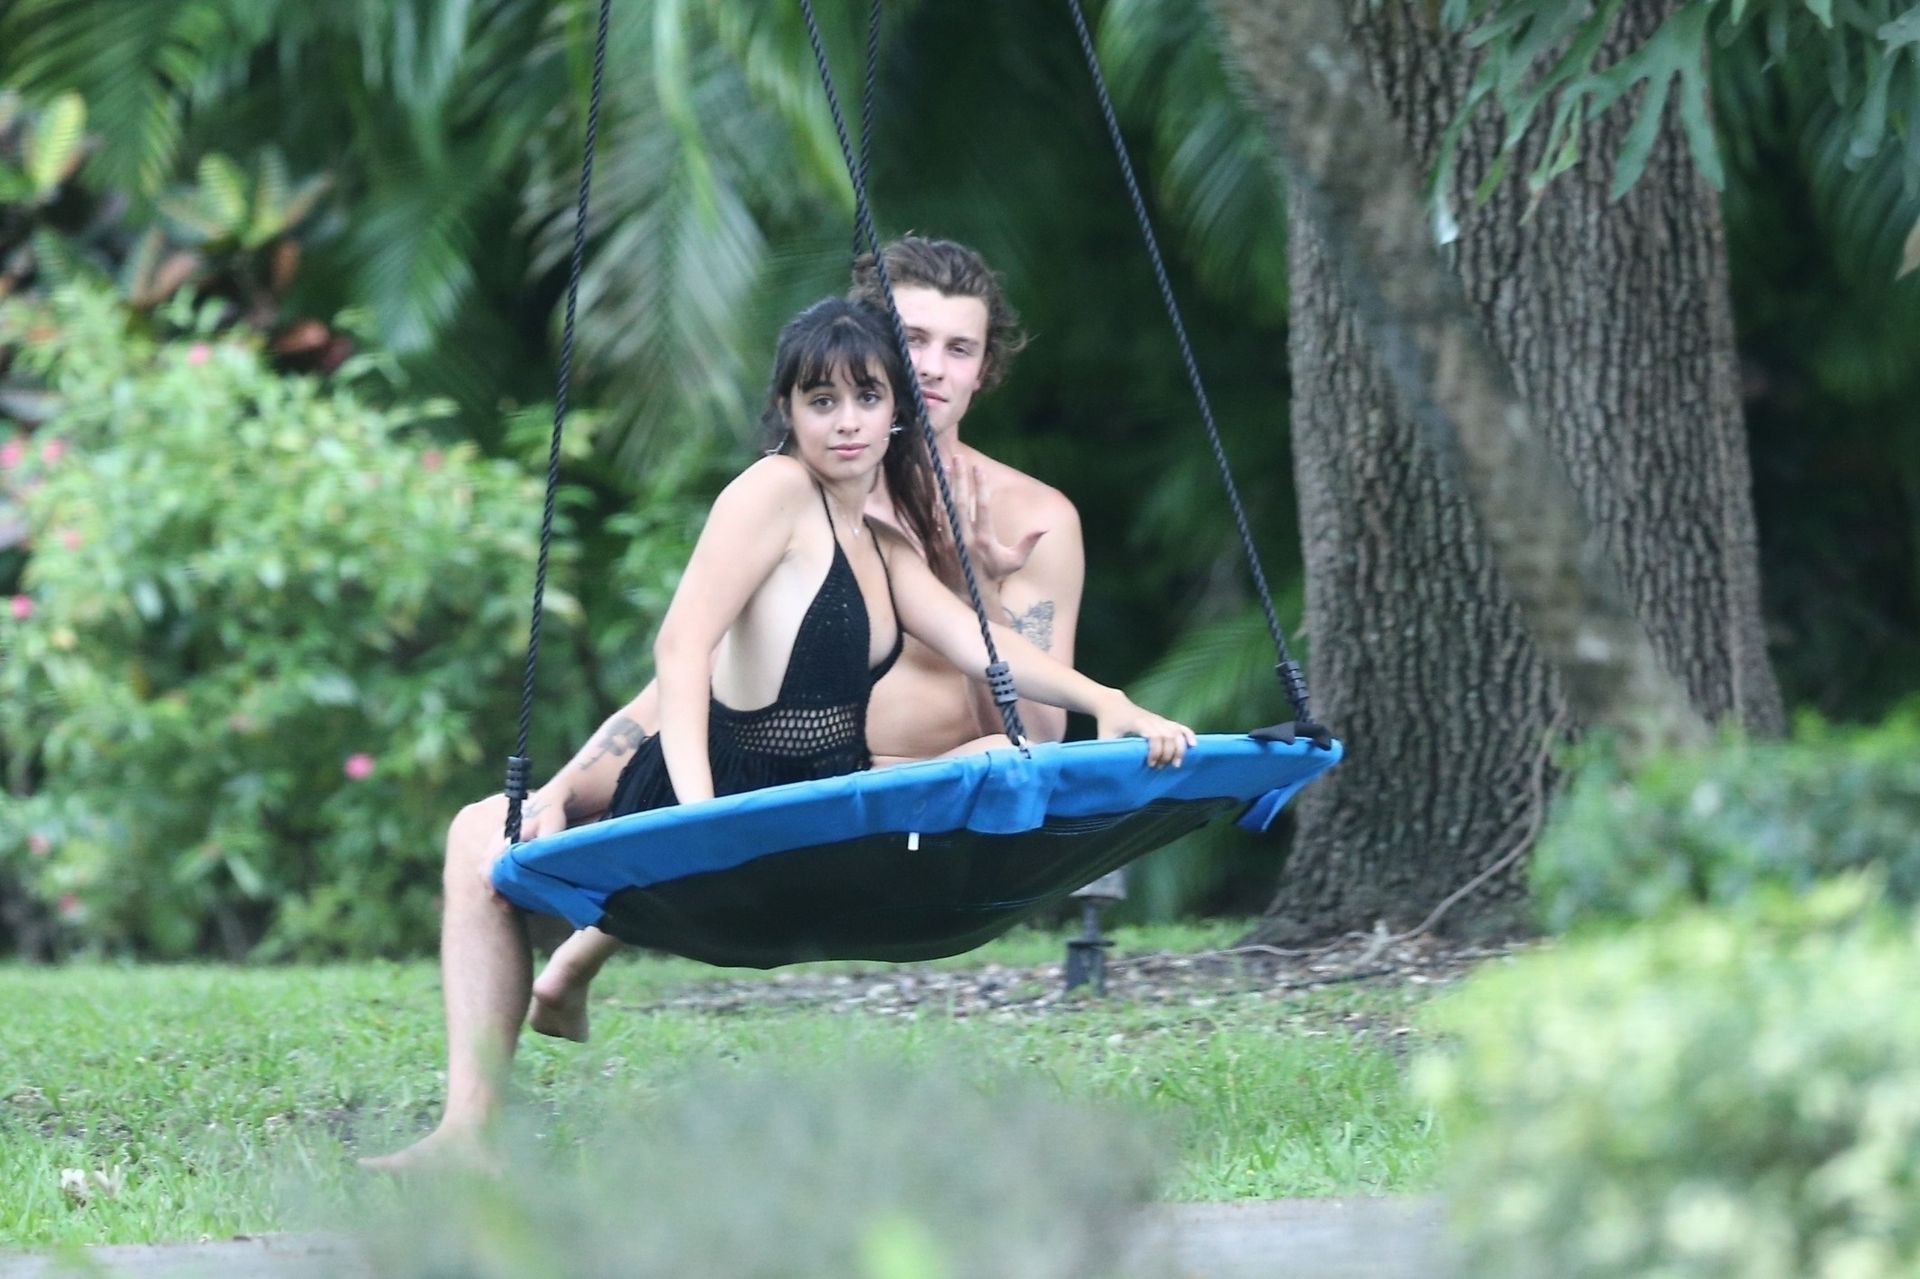 Shawn Mendes & Camila Cabello Are Having a Romantic Time on a Swing (26 Photos)